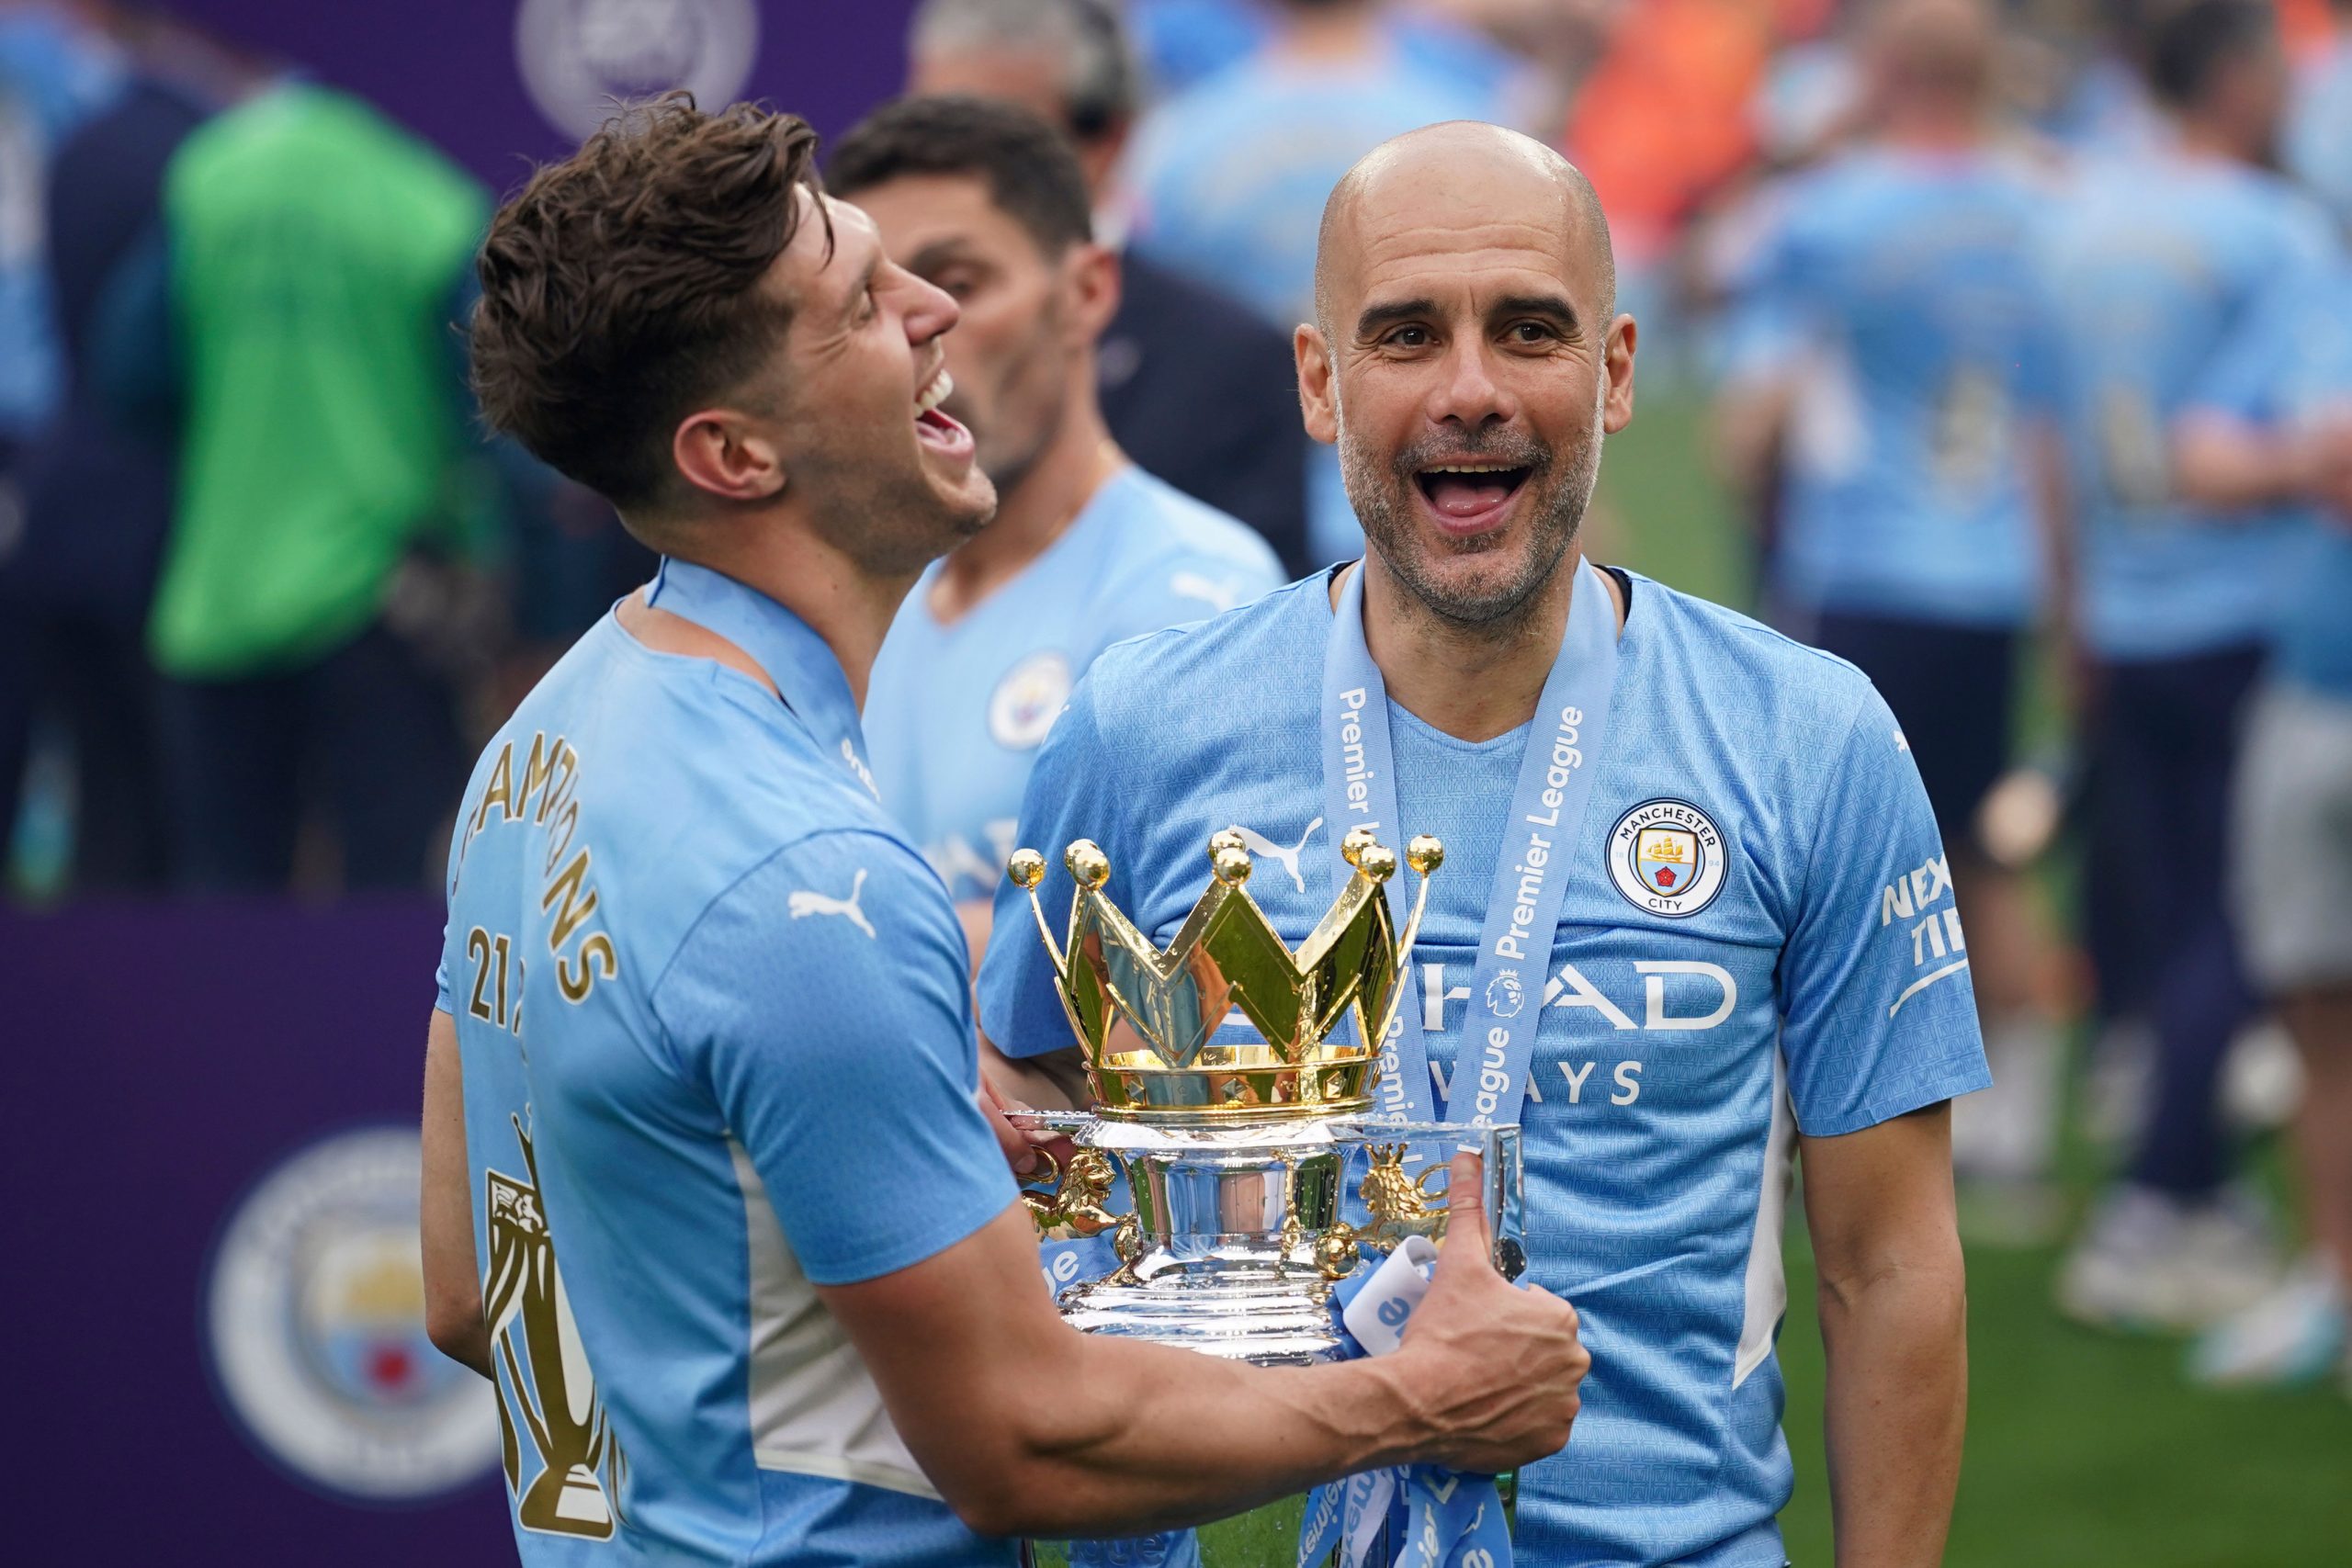 Guardiola calls Man City team ‘legends’, focuses on 4 PL wins in 5 years